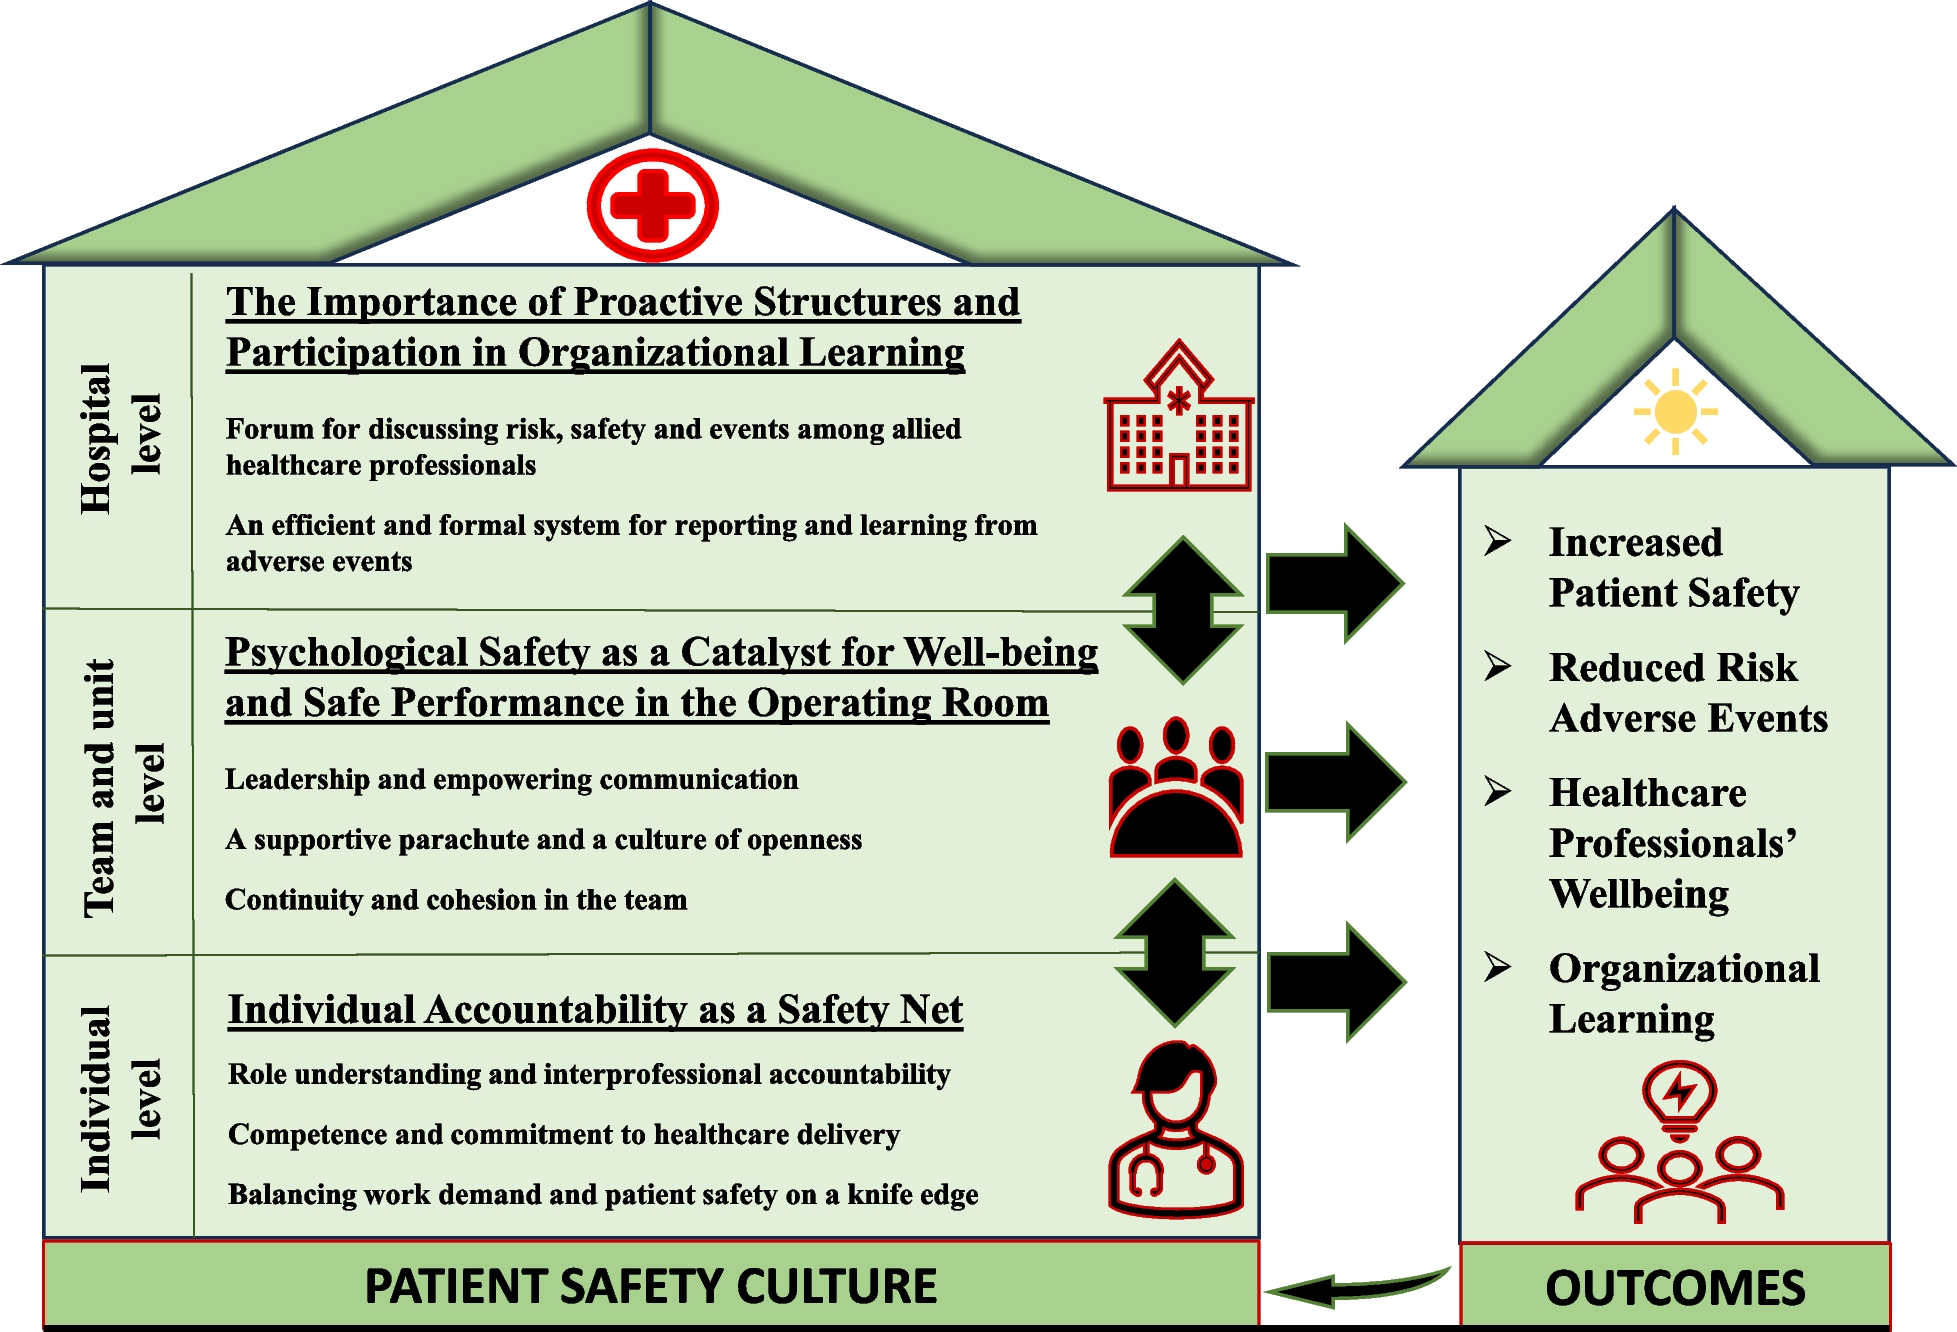 The anatomy of safe surgical teams: an interview-based qualitative study among members of surgical teams at tertiary referral hospitals in Norway